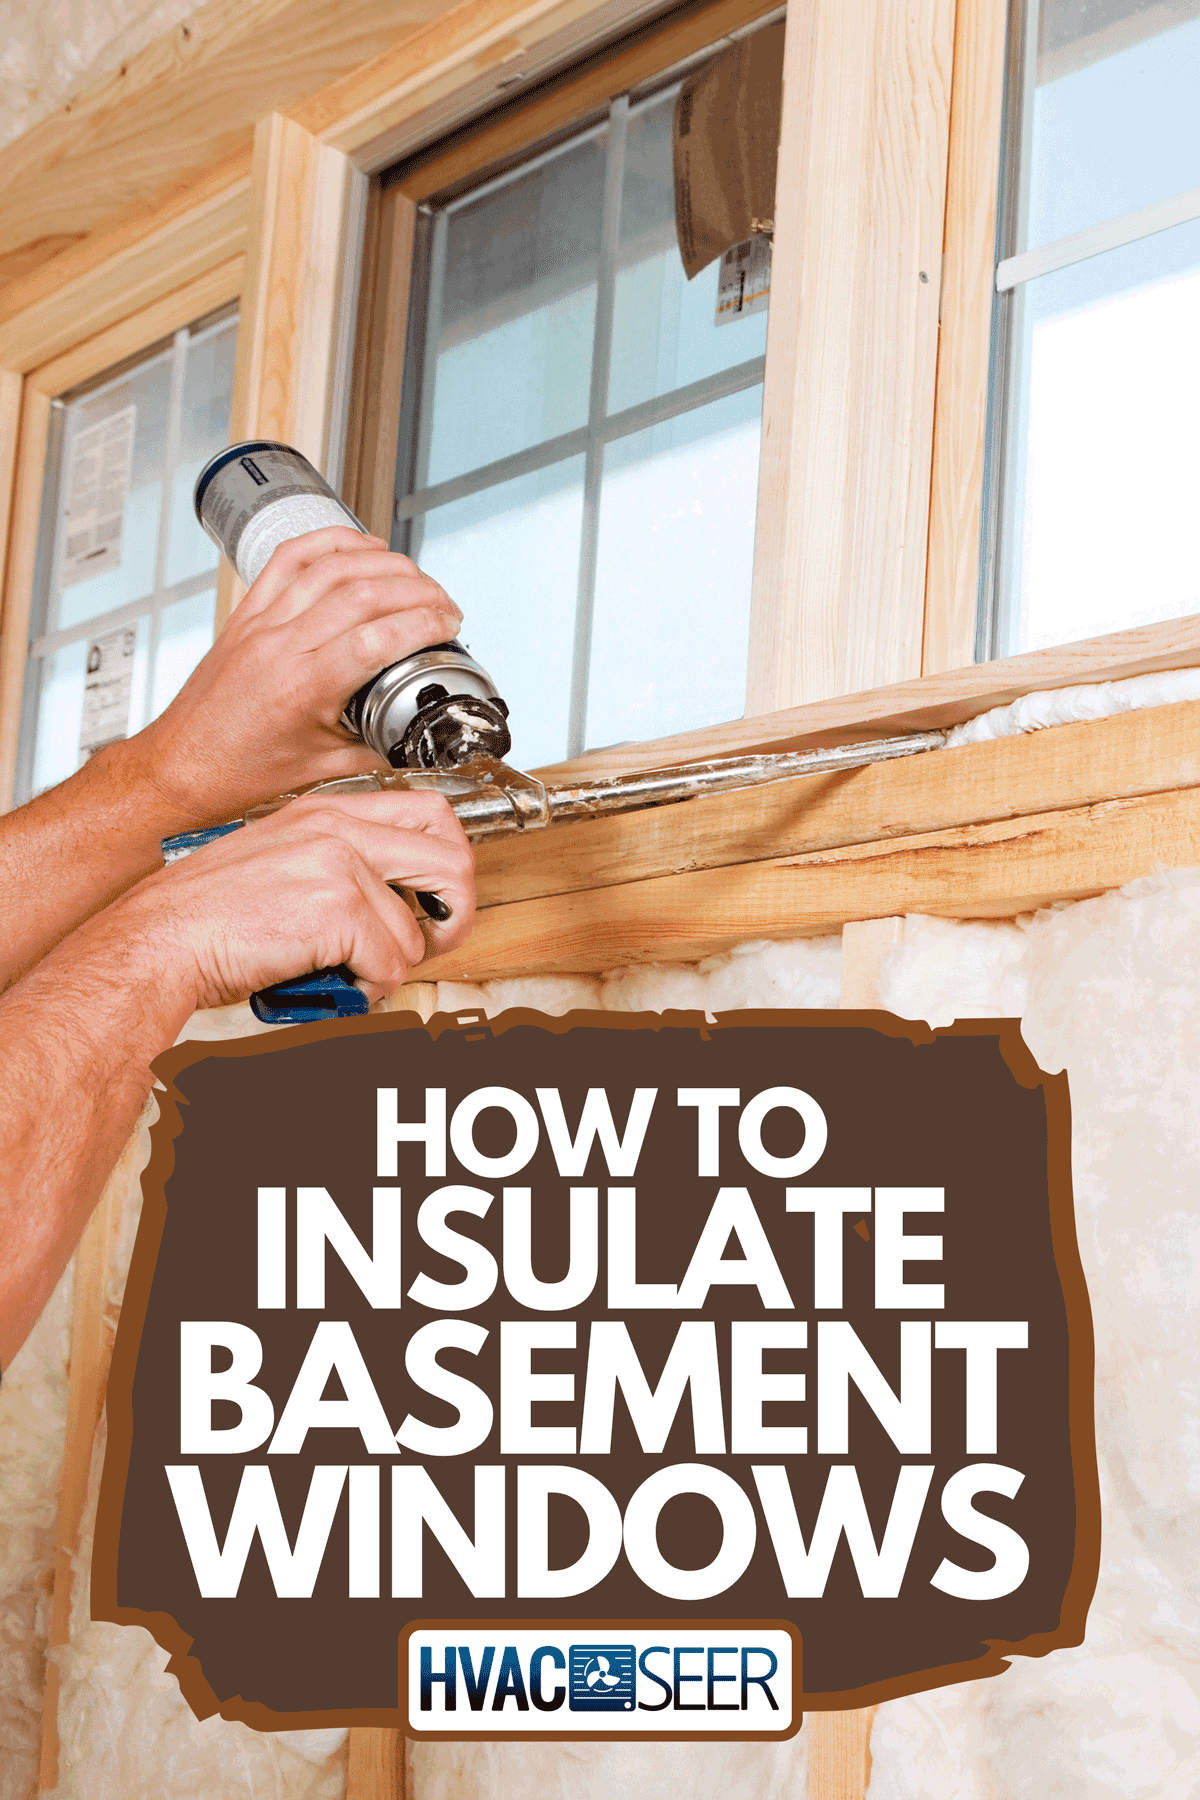 A construction worker applying expandable foam insulation to window, How To Insulate Basement Windows